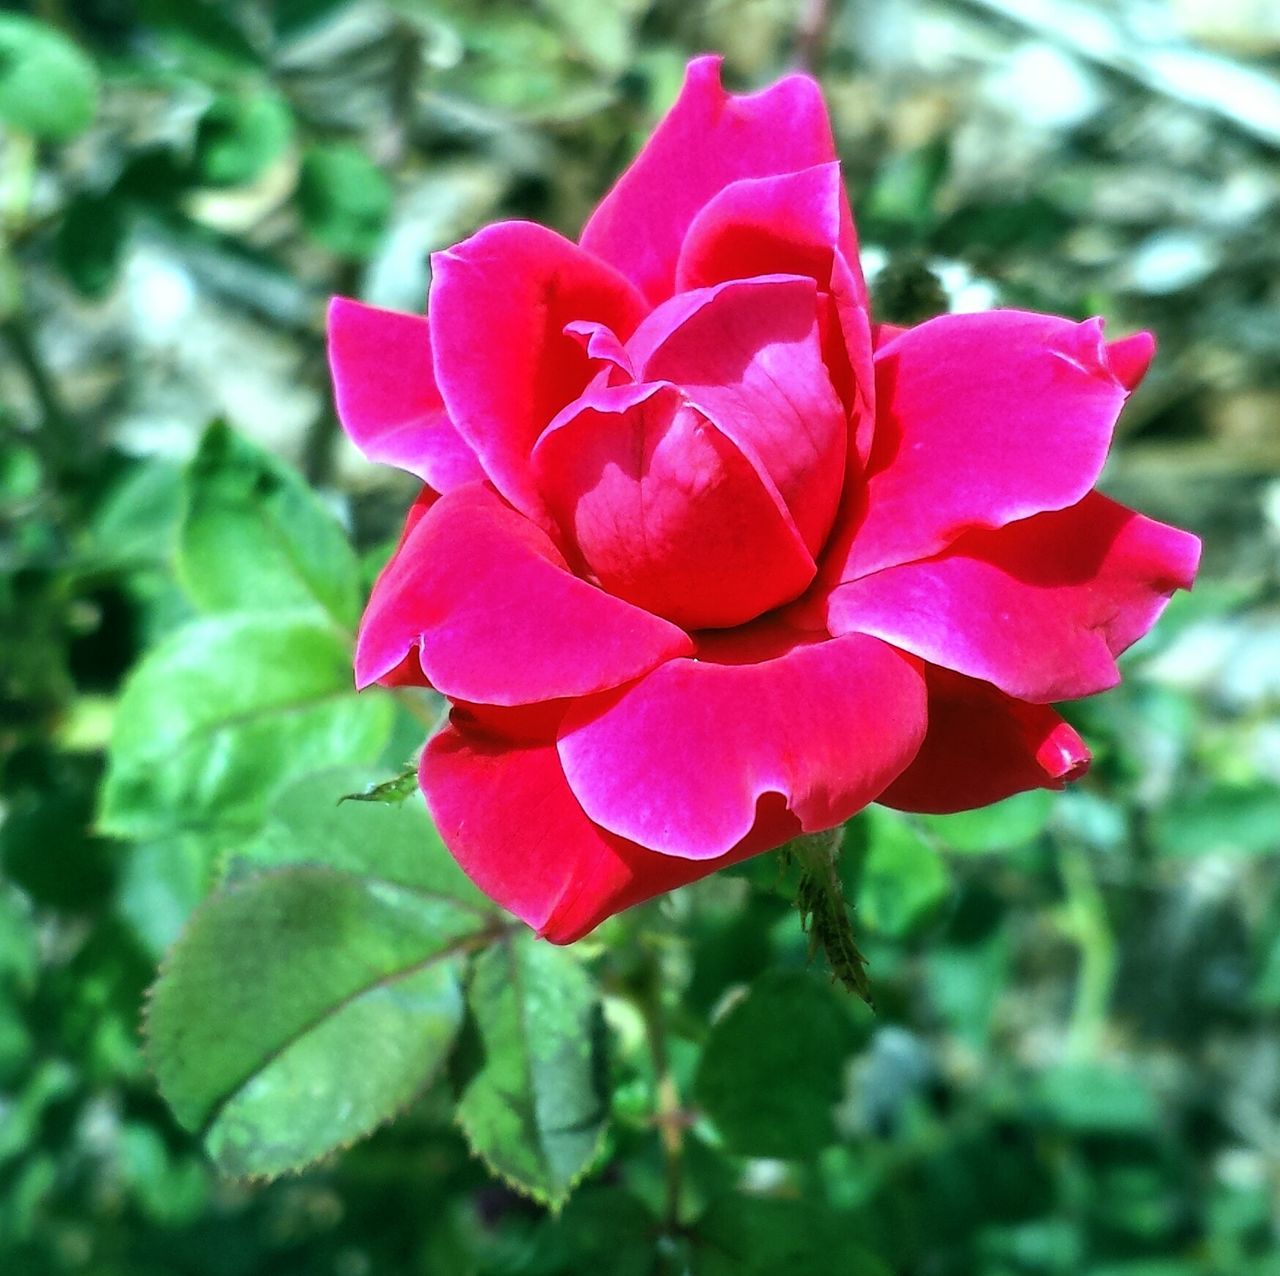 flower, petal, freshness, flower head, fragility, pink color, beauty in nature, close-up, growth, focus on foreground, single flower, blooming, rose - flower, nature, plant, in bloom, red, pink, day, outdoors